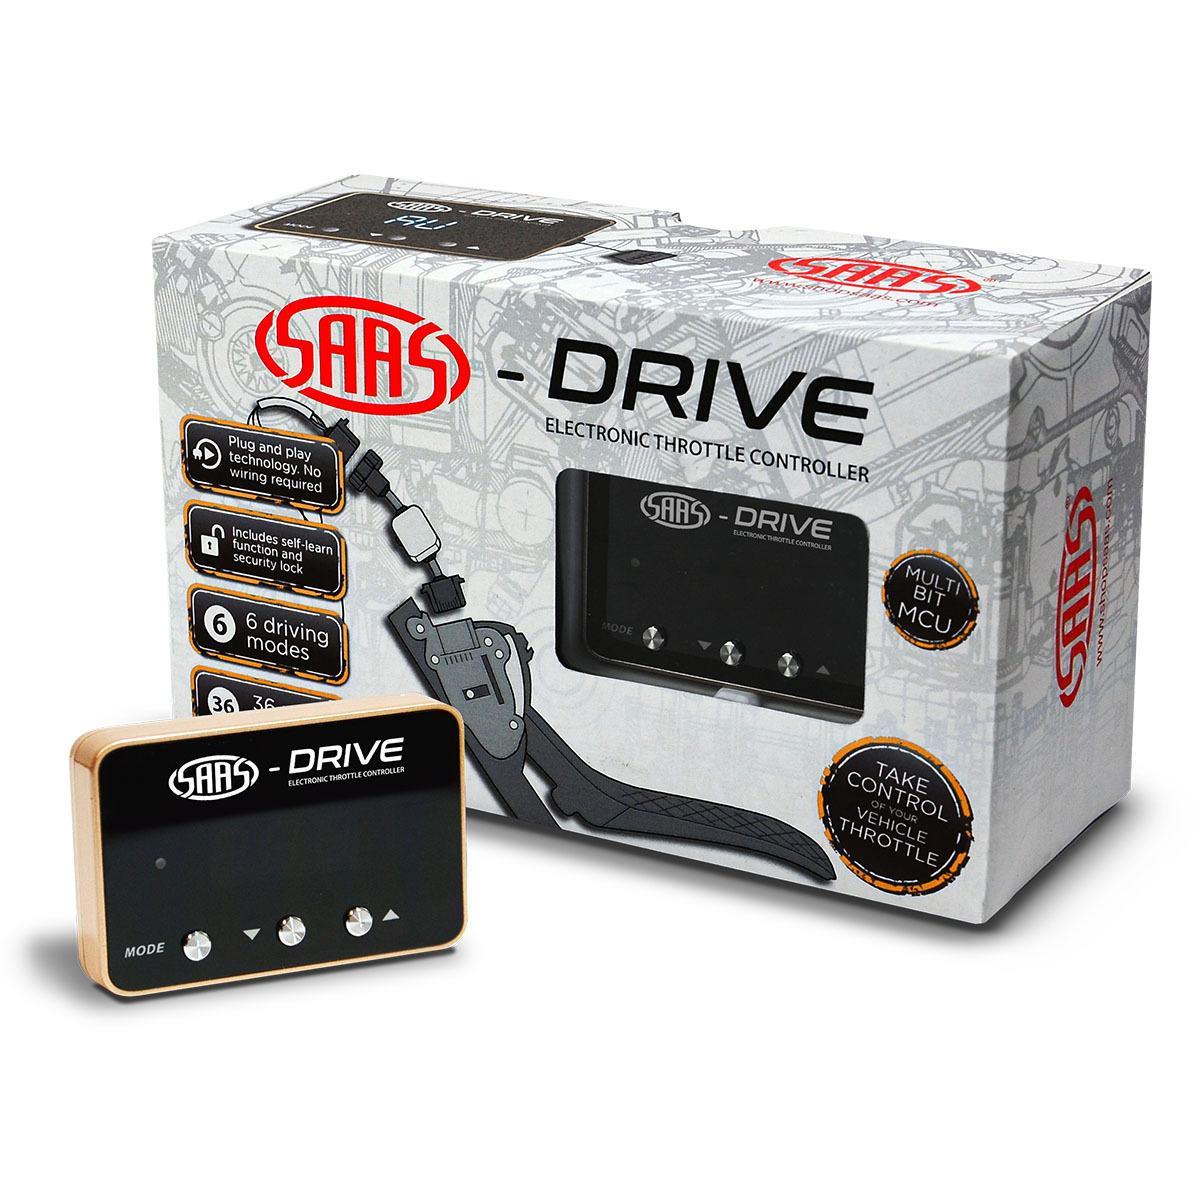 SAAS-Drive Throttle Controller for Nissan Pathfinder R52 2013 >